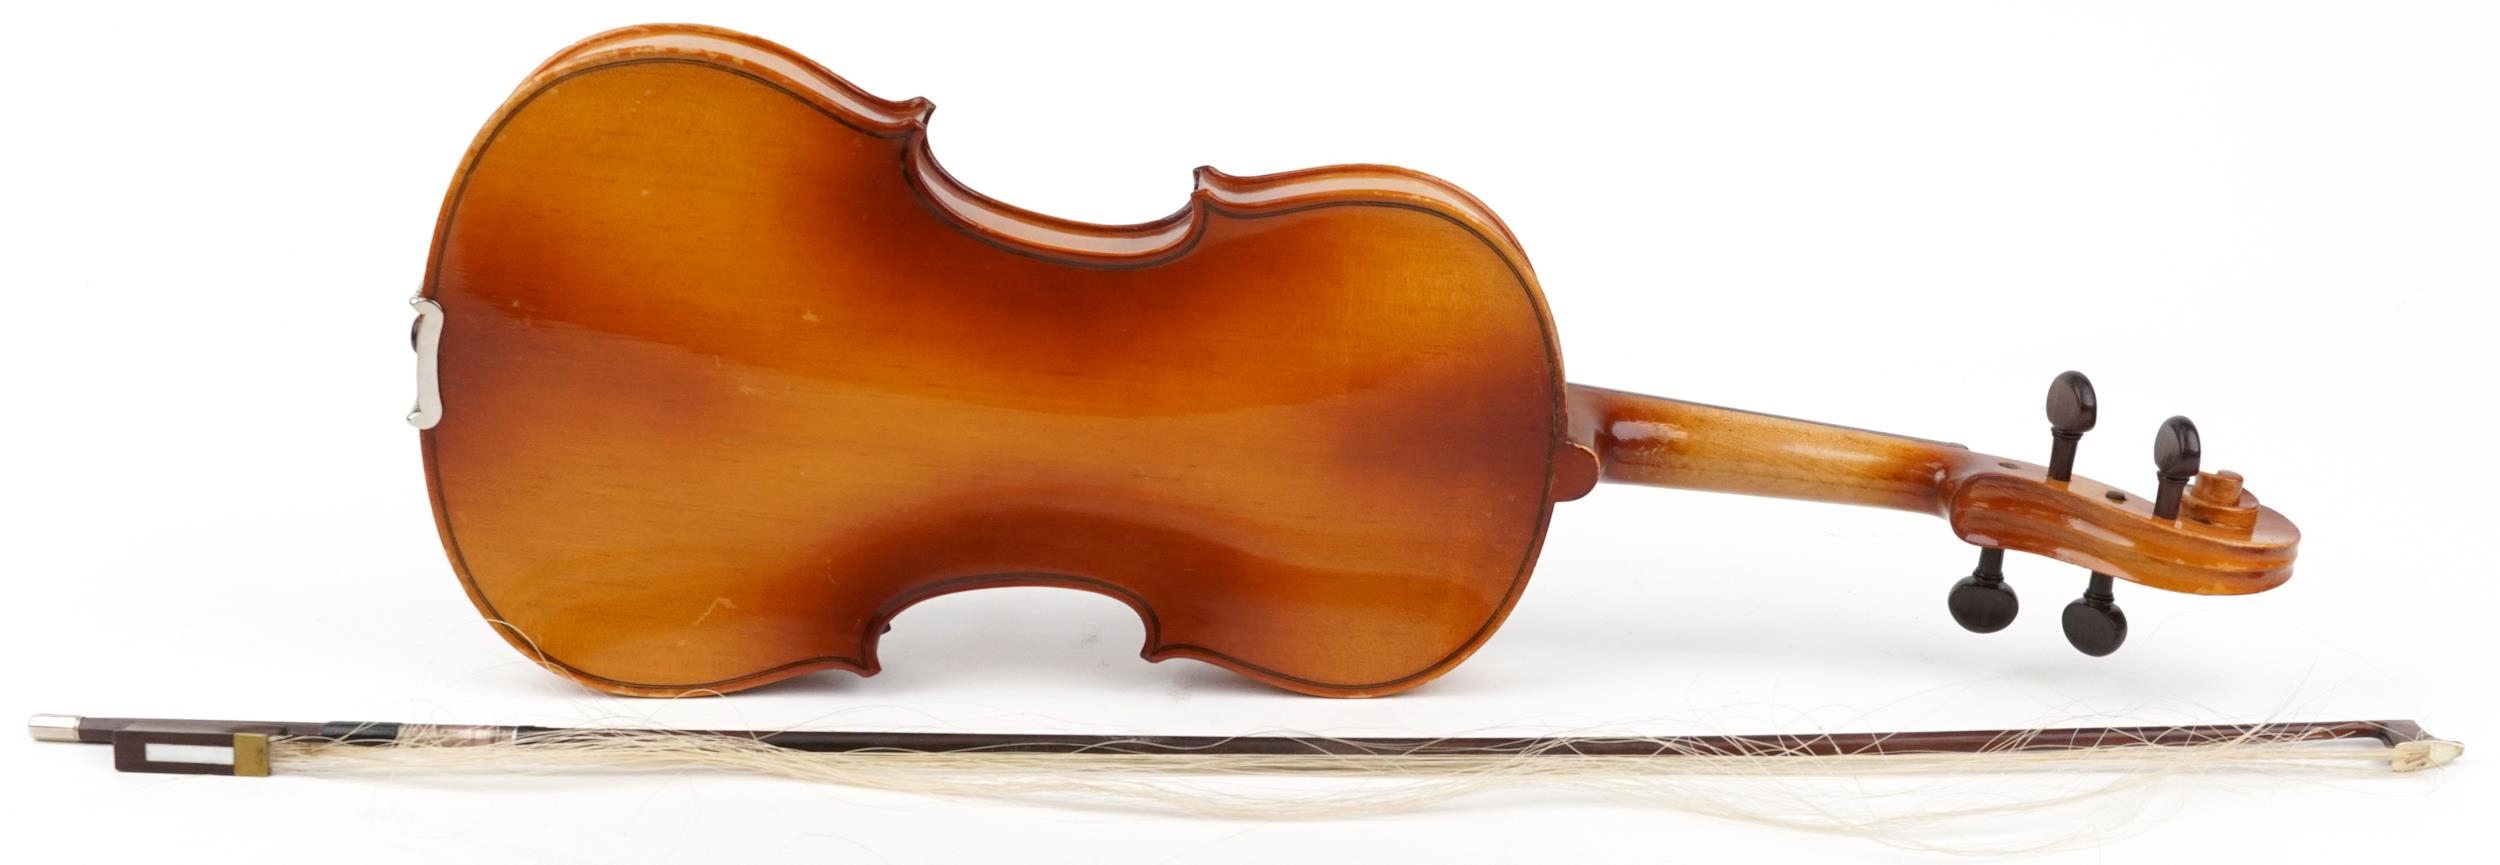 Blessing wooden violin with one piece back and rosewood bow housed in a protective case, the - Image 2 of 5